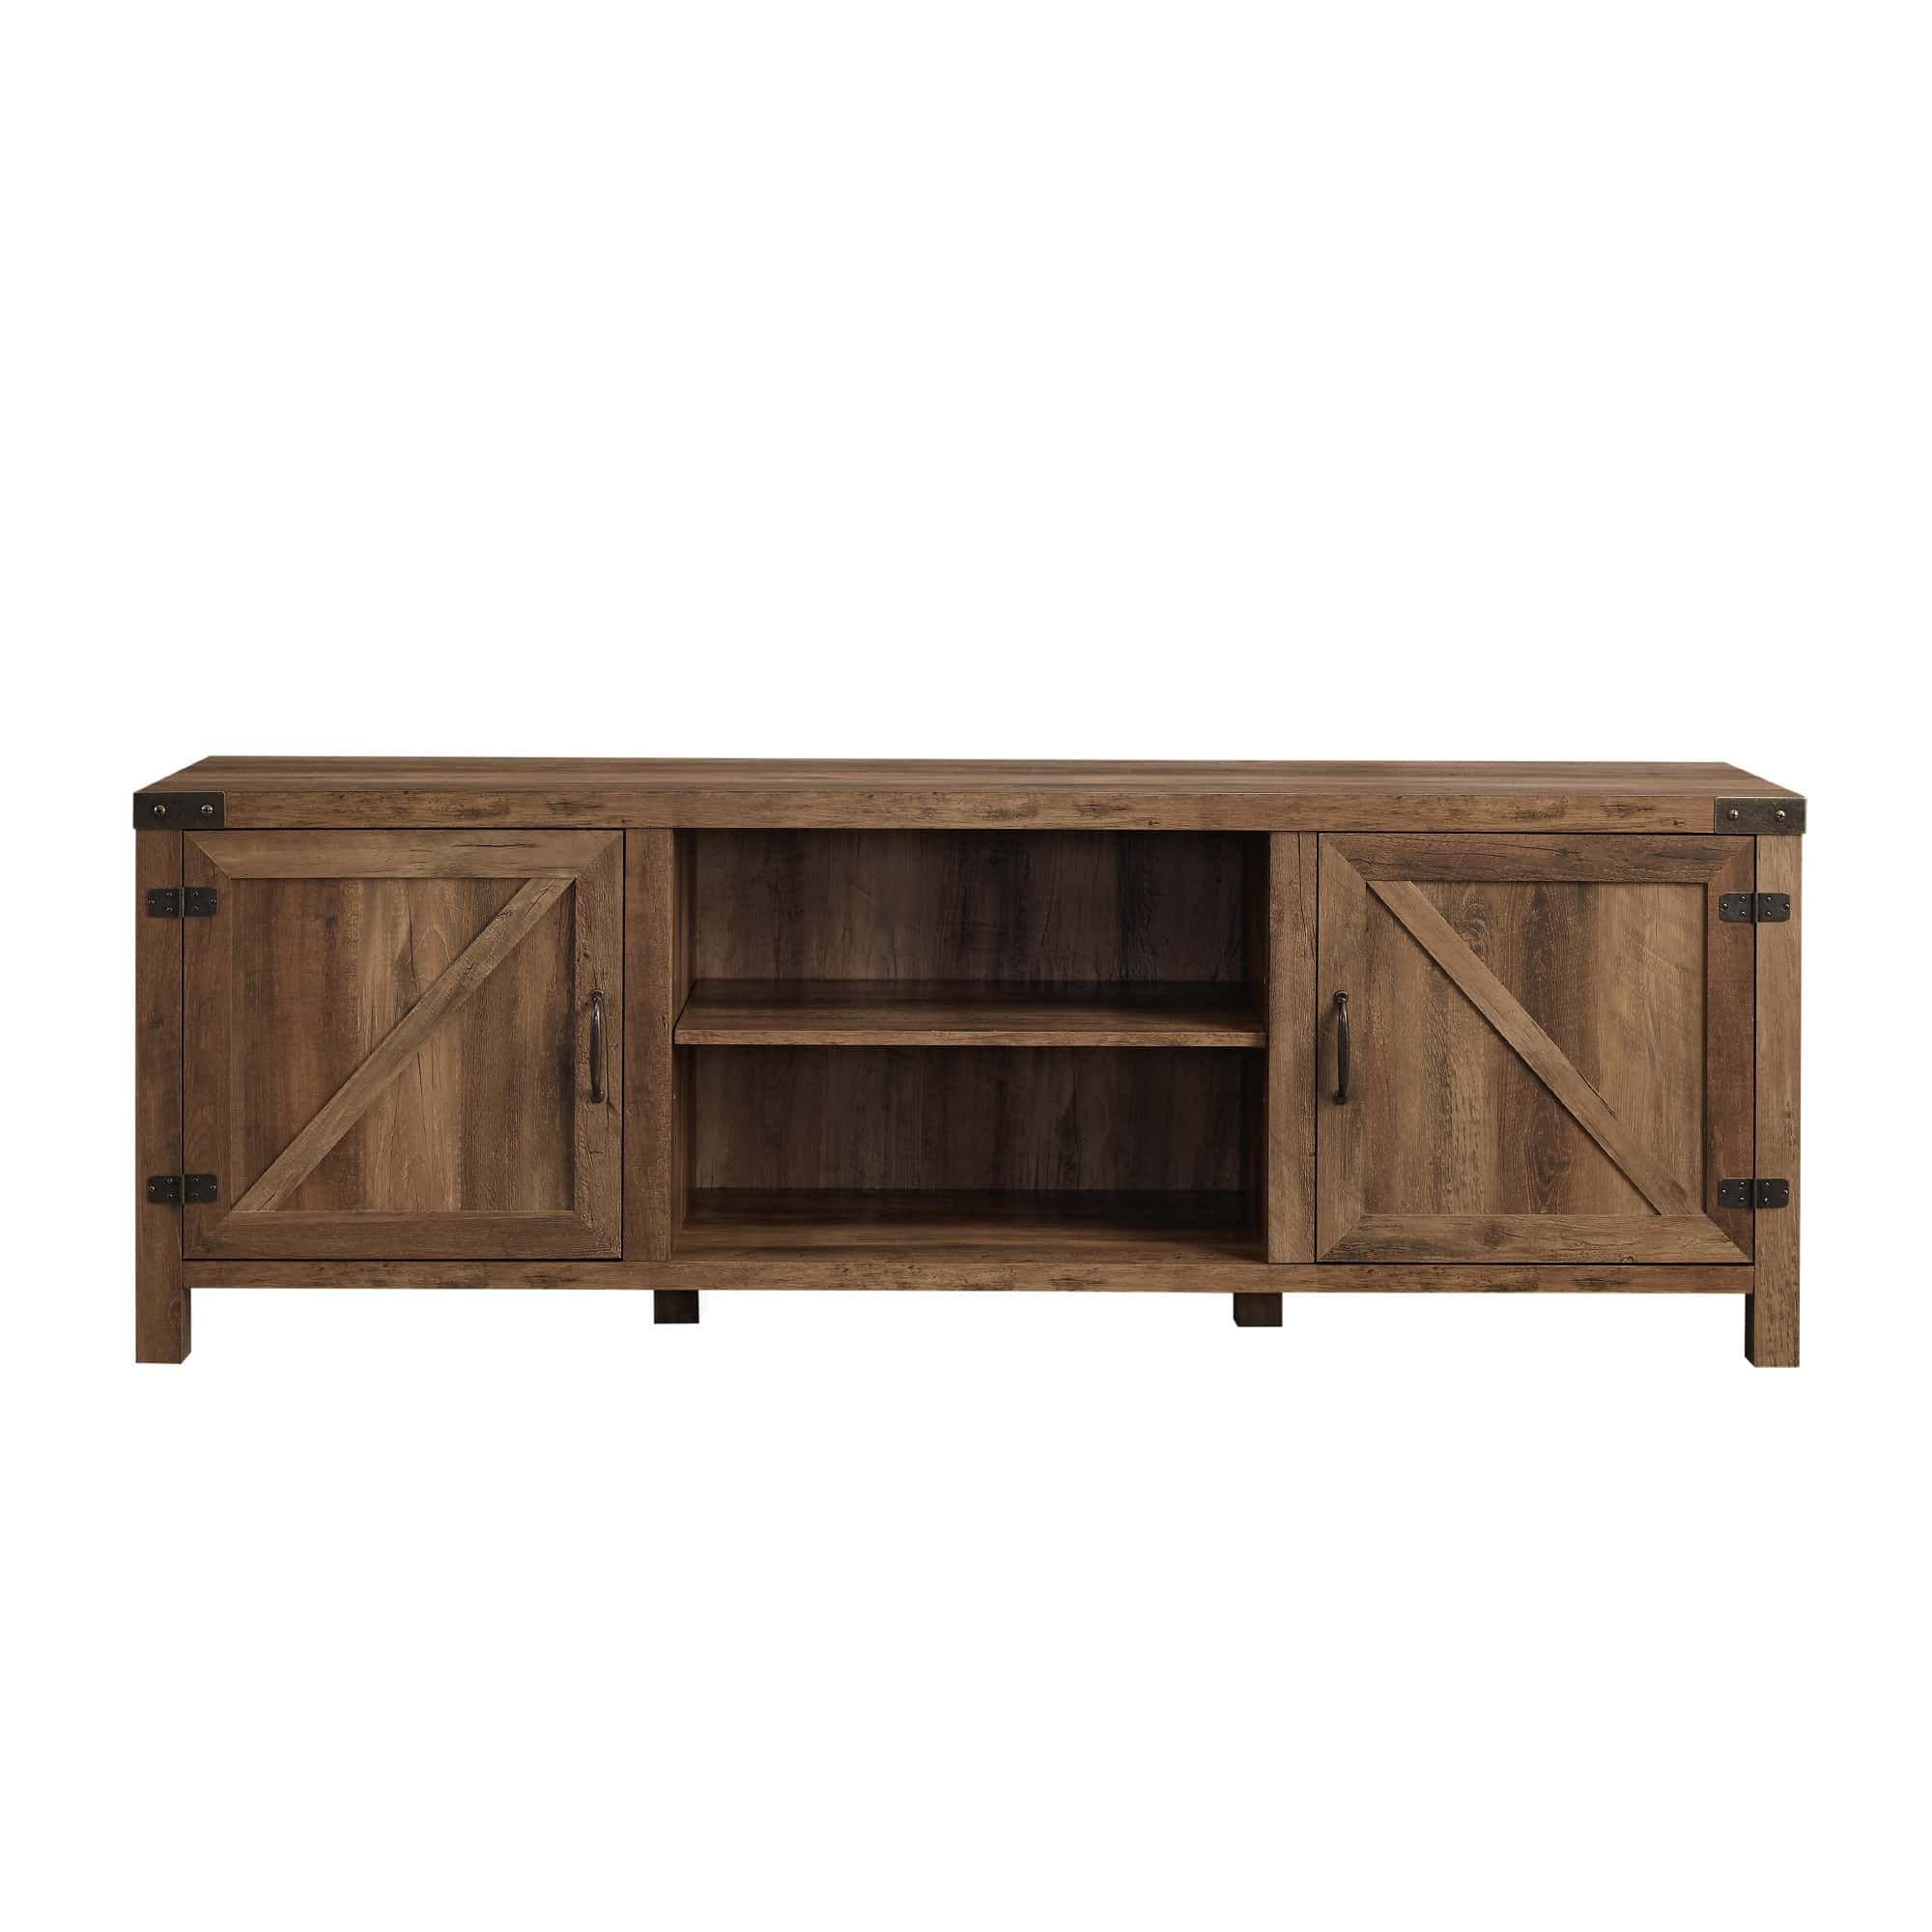 70 Inch Modern Farmhouse Tv Stand – Rustic Oakwalker Edison Within Farmhouse Tv Stands For 70 Inch Tv (Gallery 10 of 20)